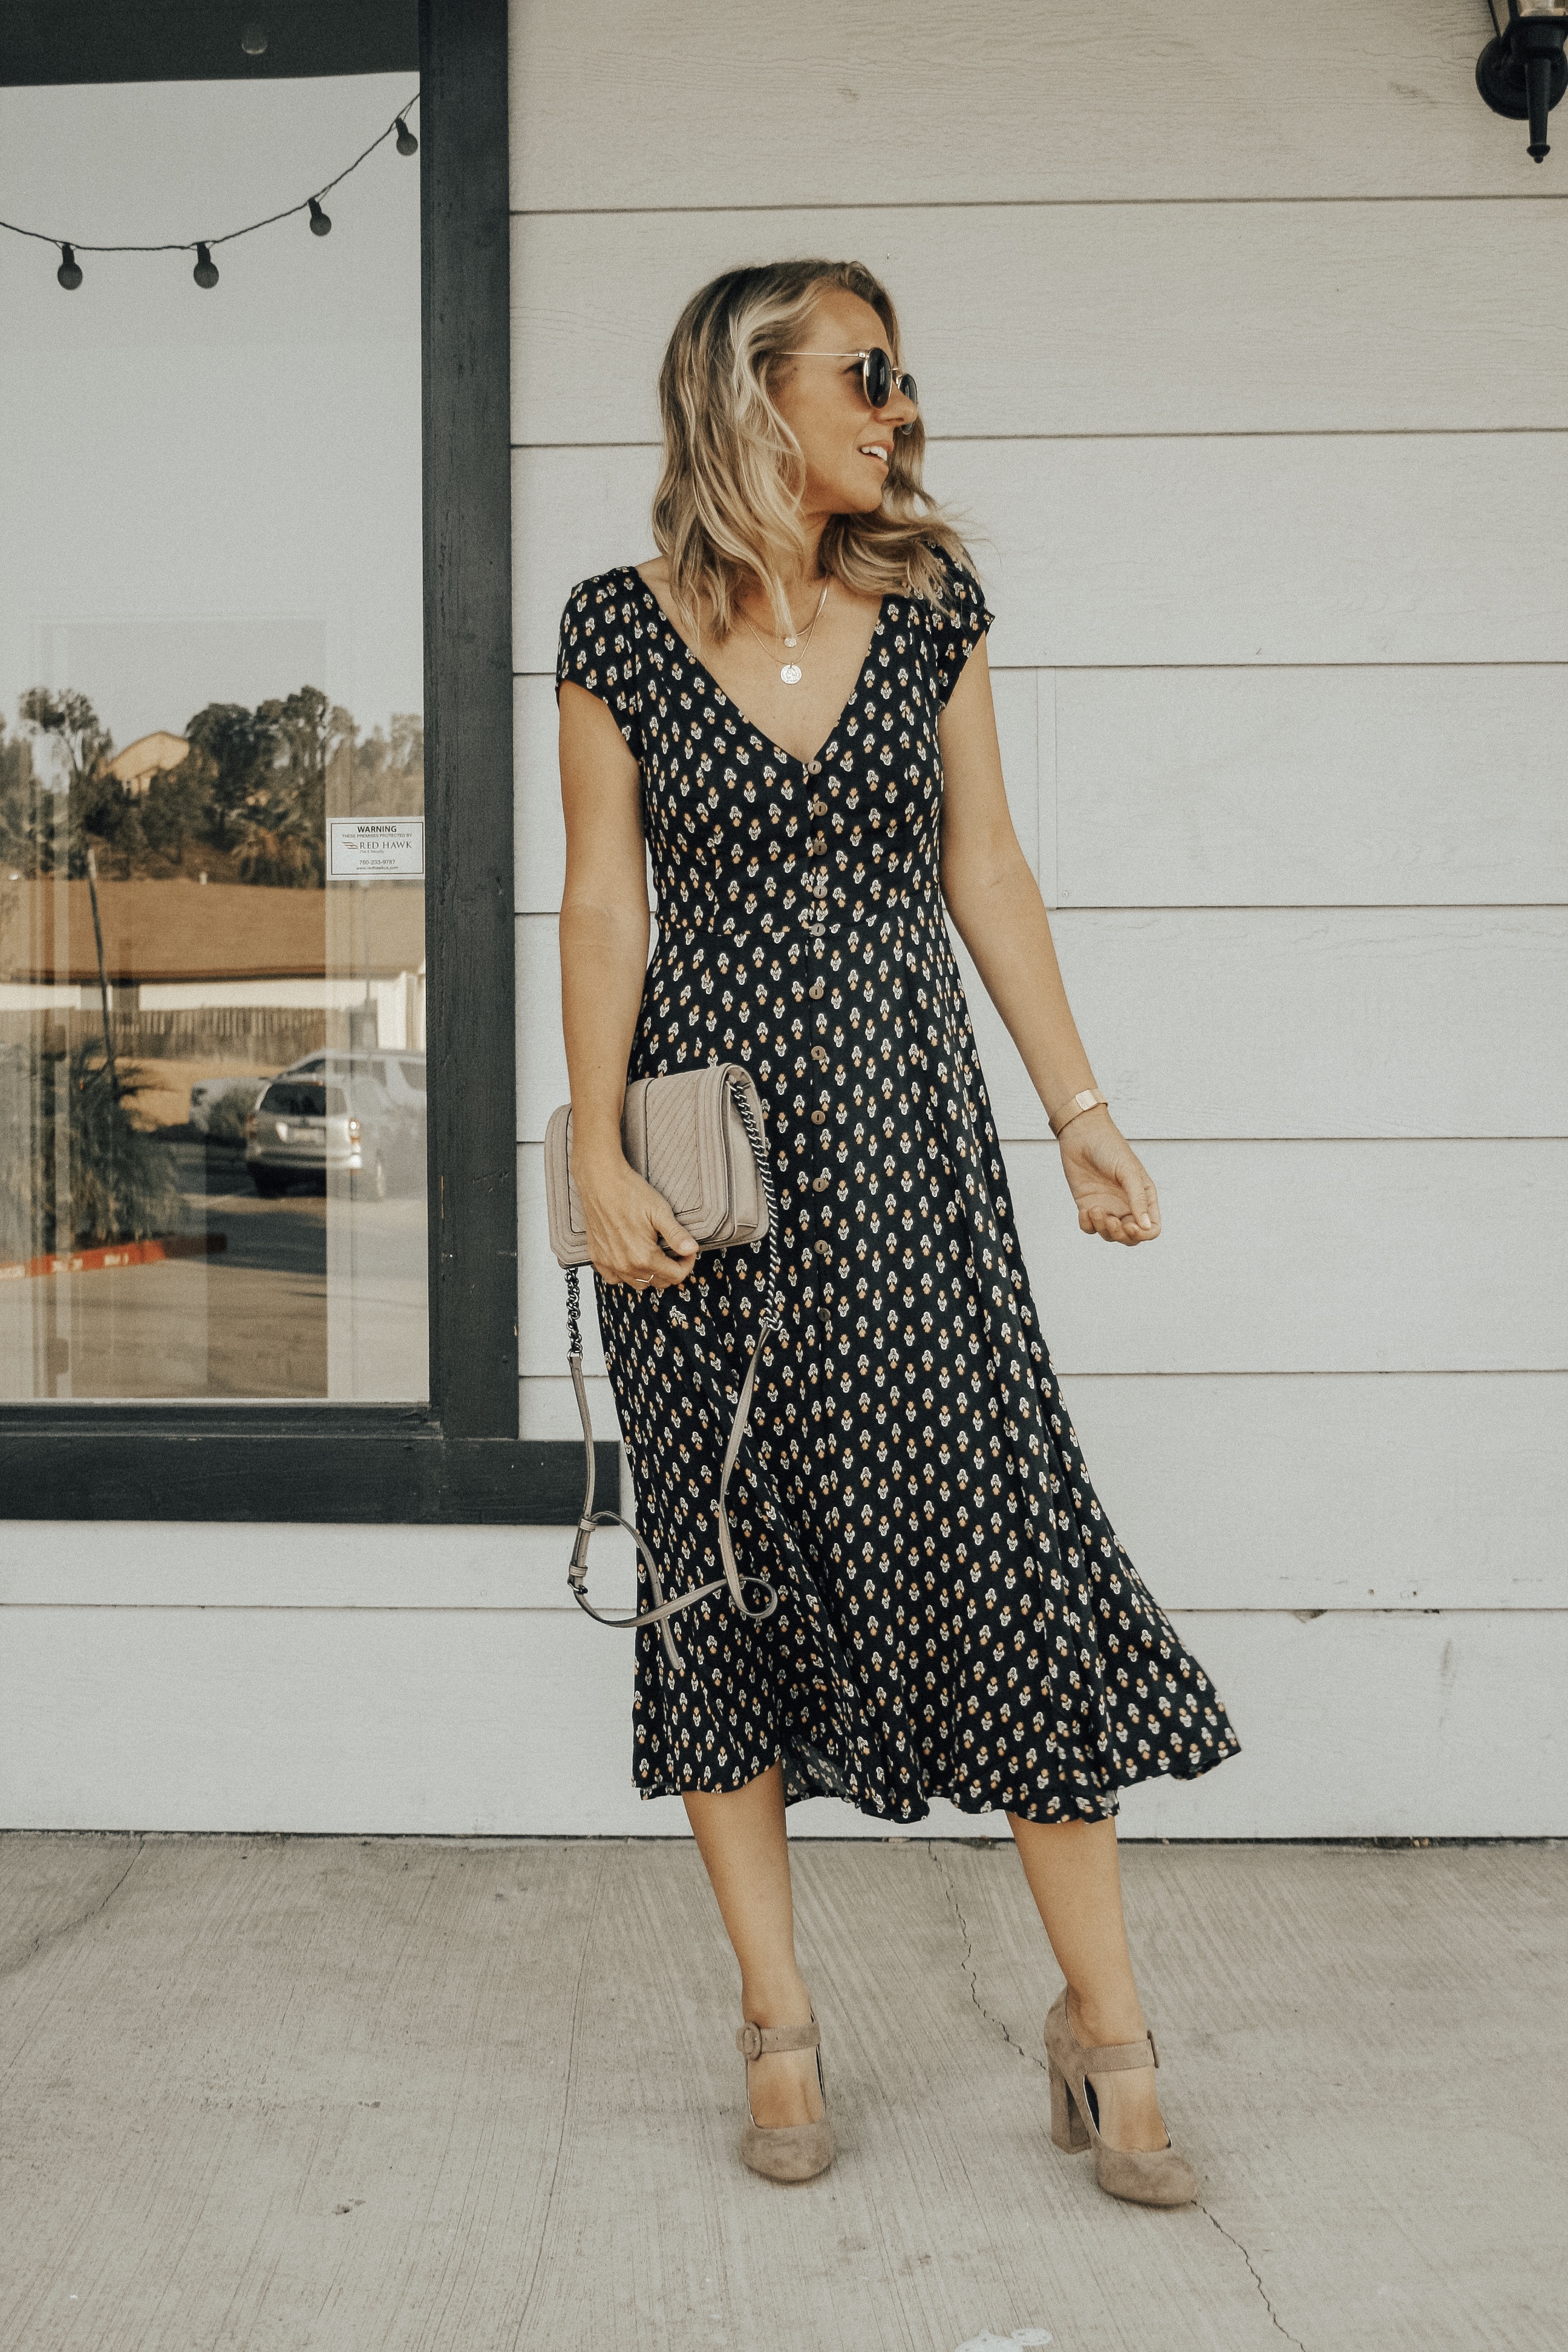 MARY JANE'S ARE BACK + RESTRICTED SHOES- Jaclyn De Leon Style + fall shoe trends + what to wear this season + boho floral midi dress + fall shoe edit + mom style + styling the mary jane shoe + block heel + rebecca minkoff handbag + retro style + 90's fashion